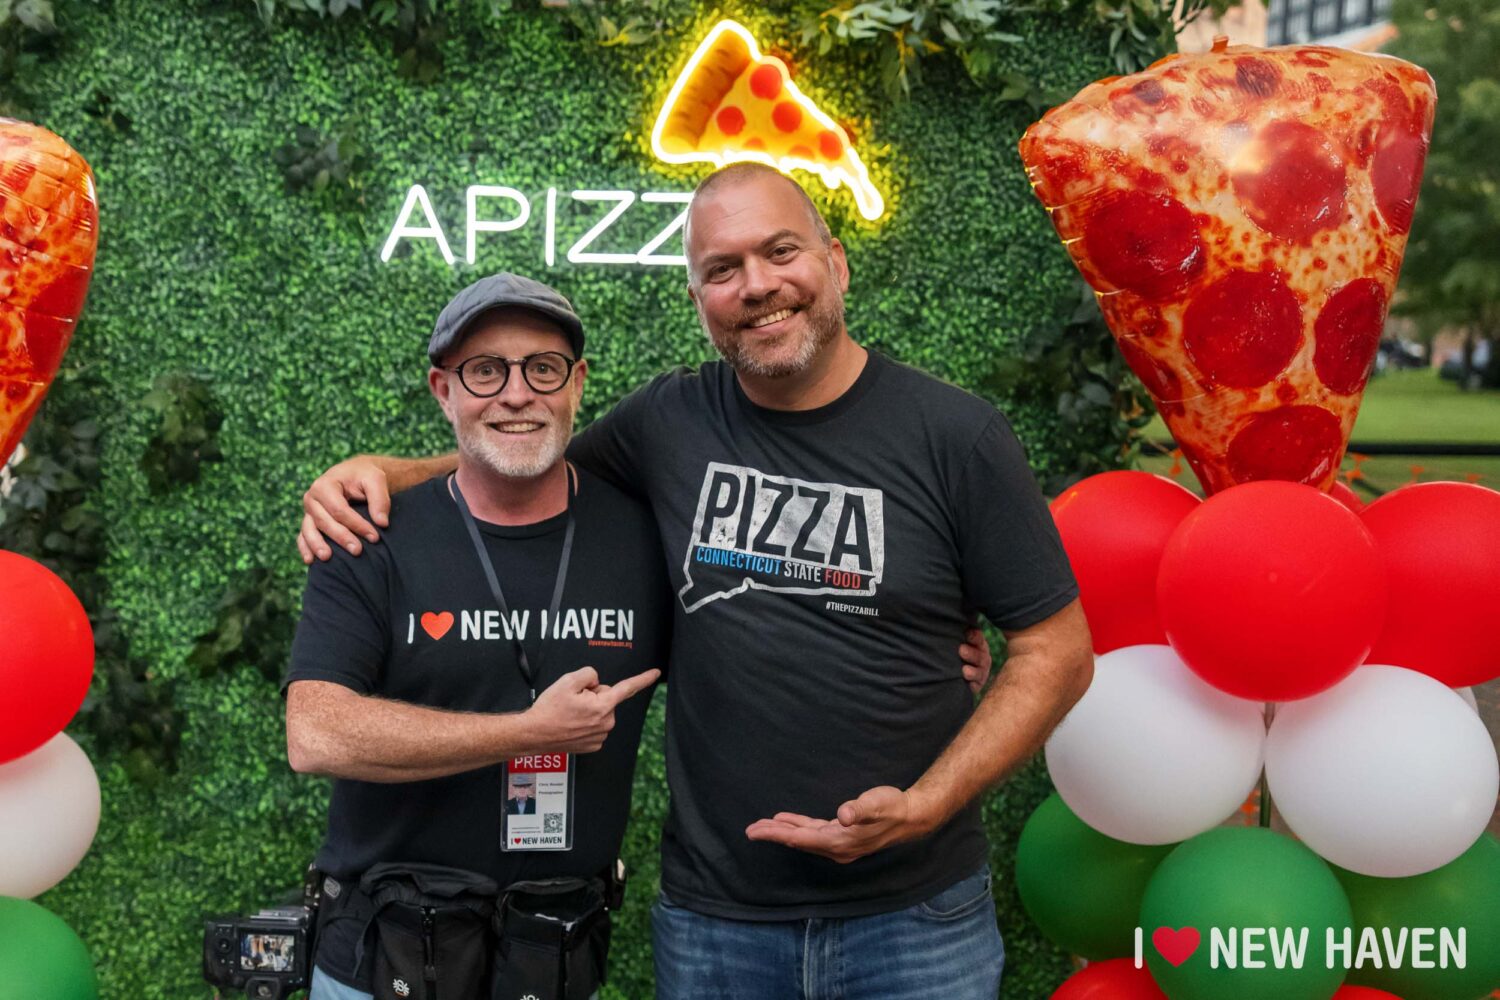 Chris Randall and Colin Caplan at the New Haven Apizza Feast